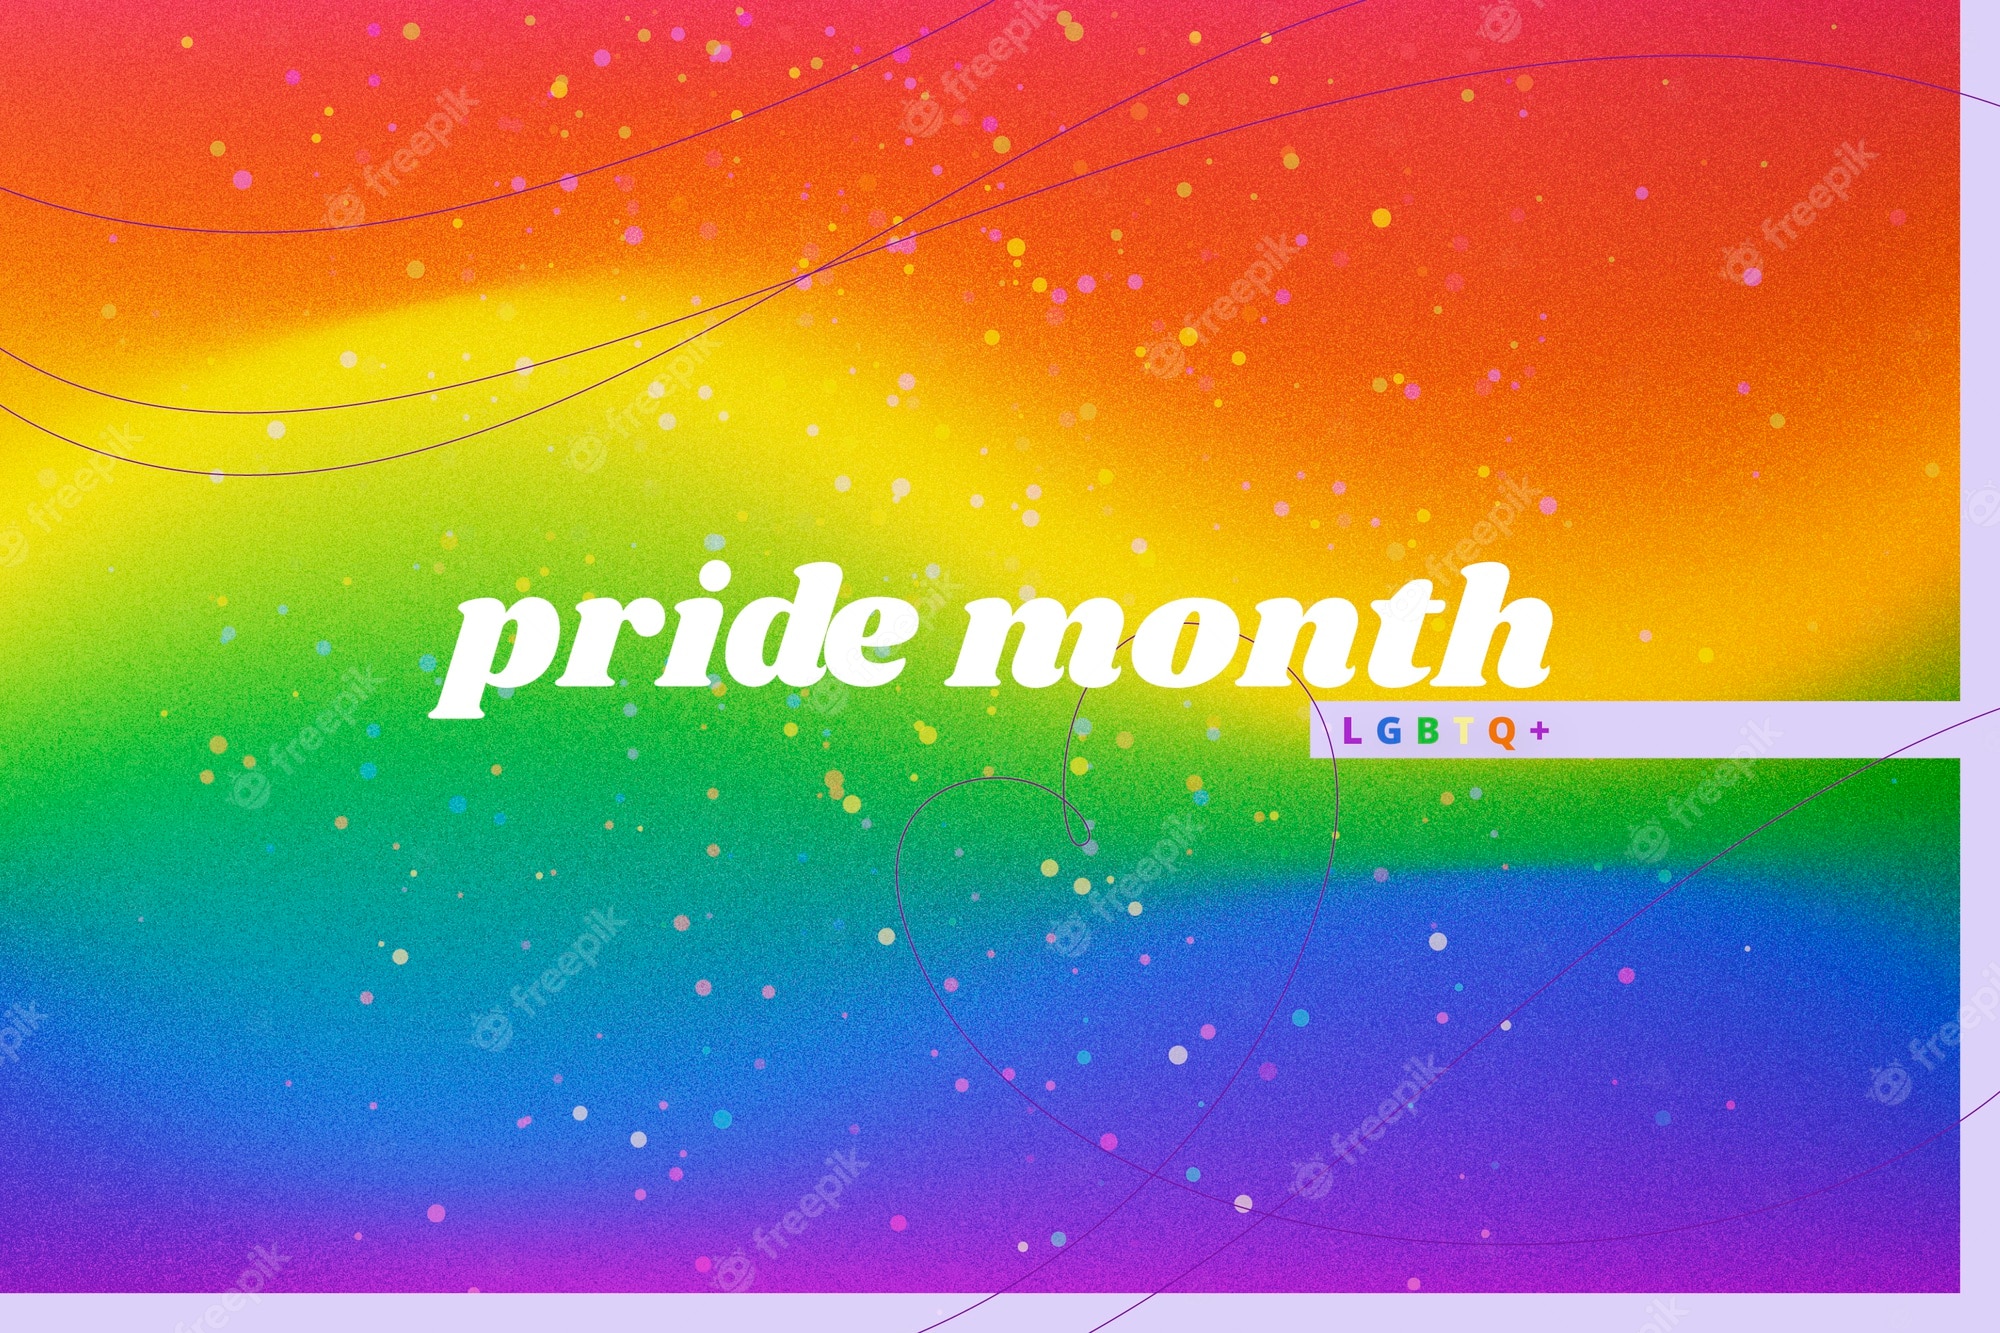 Pride month poster with rainbow background - Pride